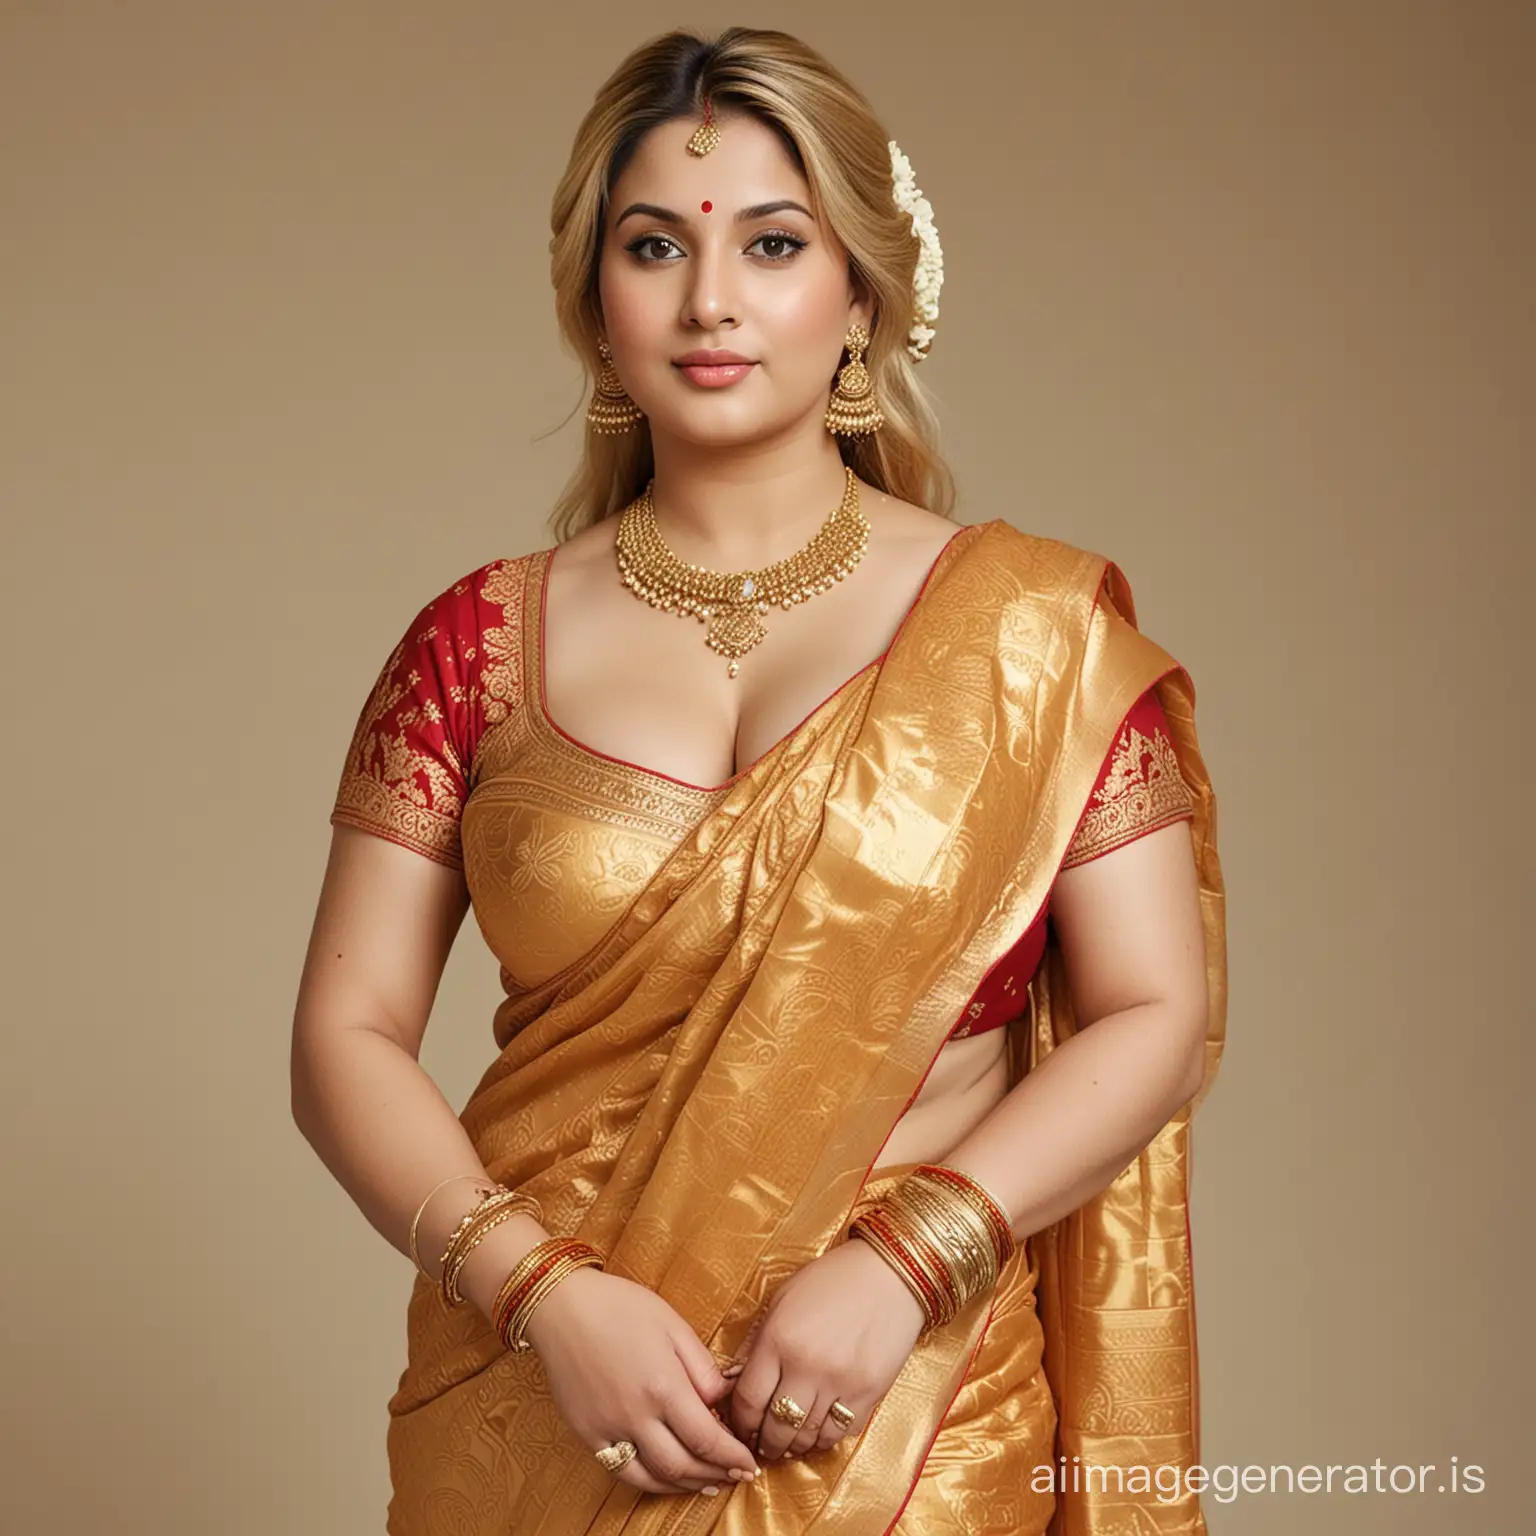 Generate full body image of a 27 year old very busty big fatty breast, big fatty thighs, big fatty hand , big fatty butts and curvy completely American origin fatty chubby obese very fair white skin girl blonde hair wearing traditional style banarasi saree and wearing gold bangles in hand and wearing gold necklace with gold jewelry in india wedding program